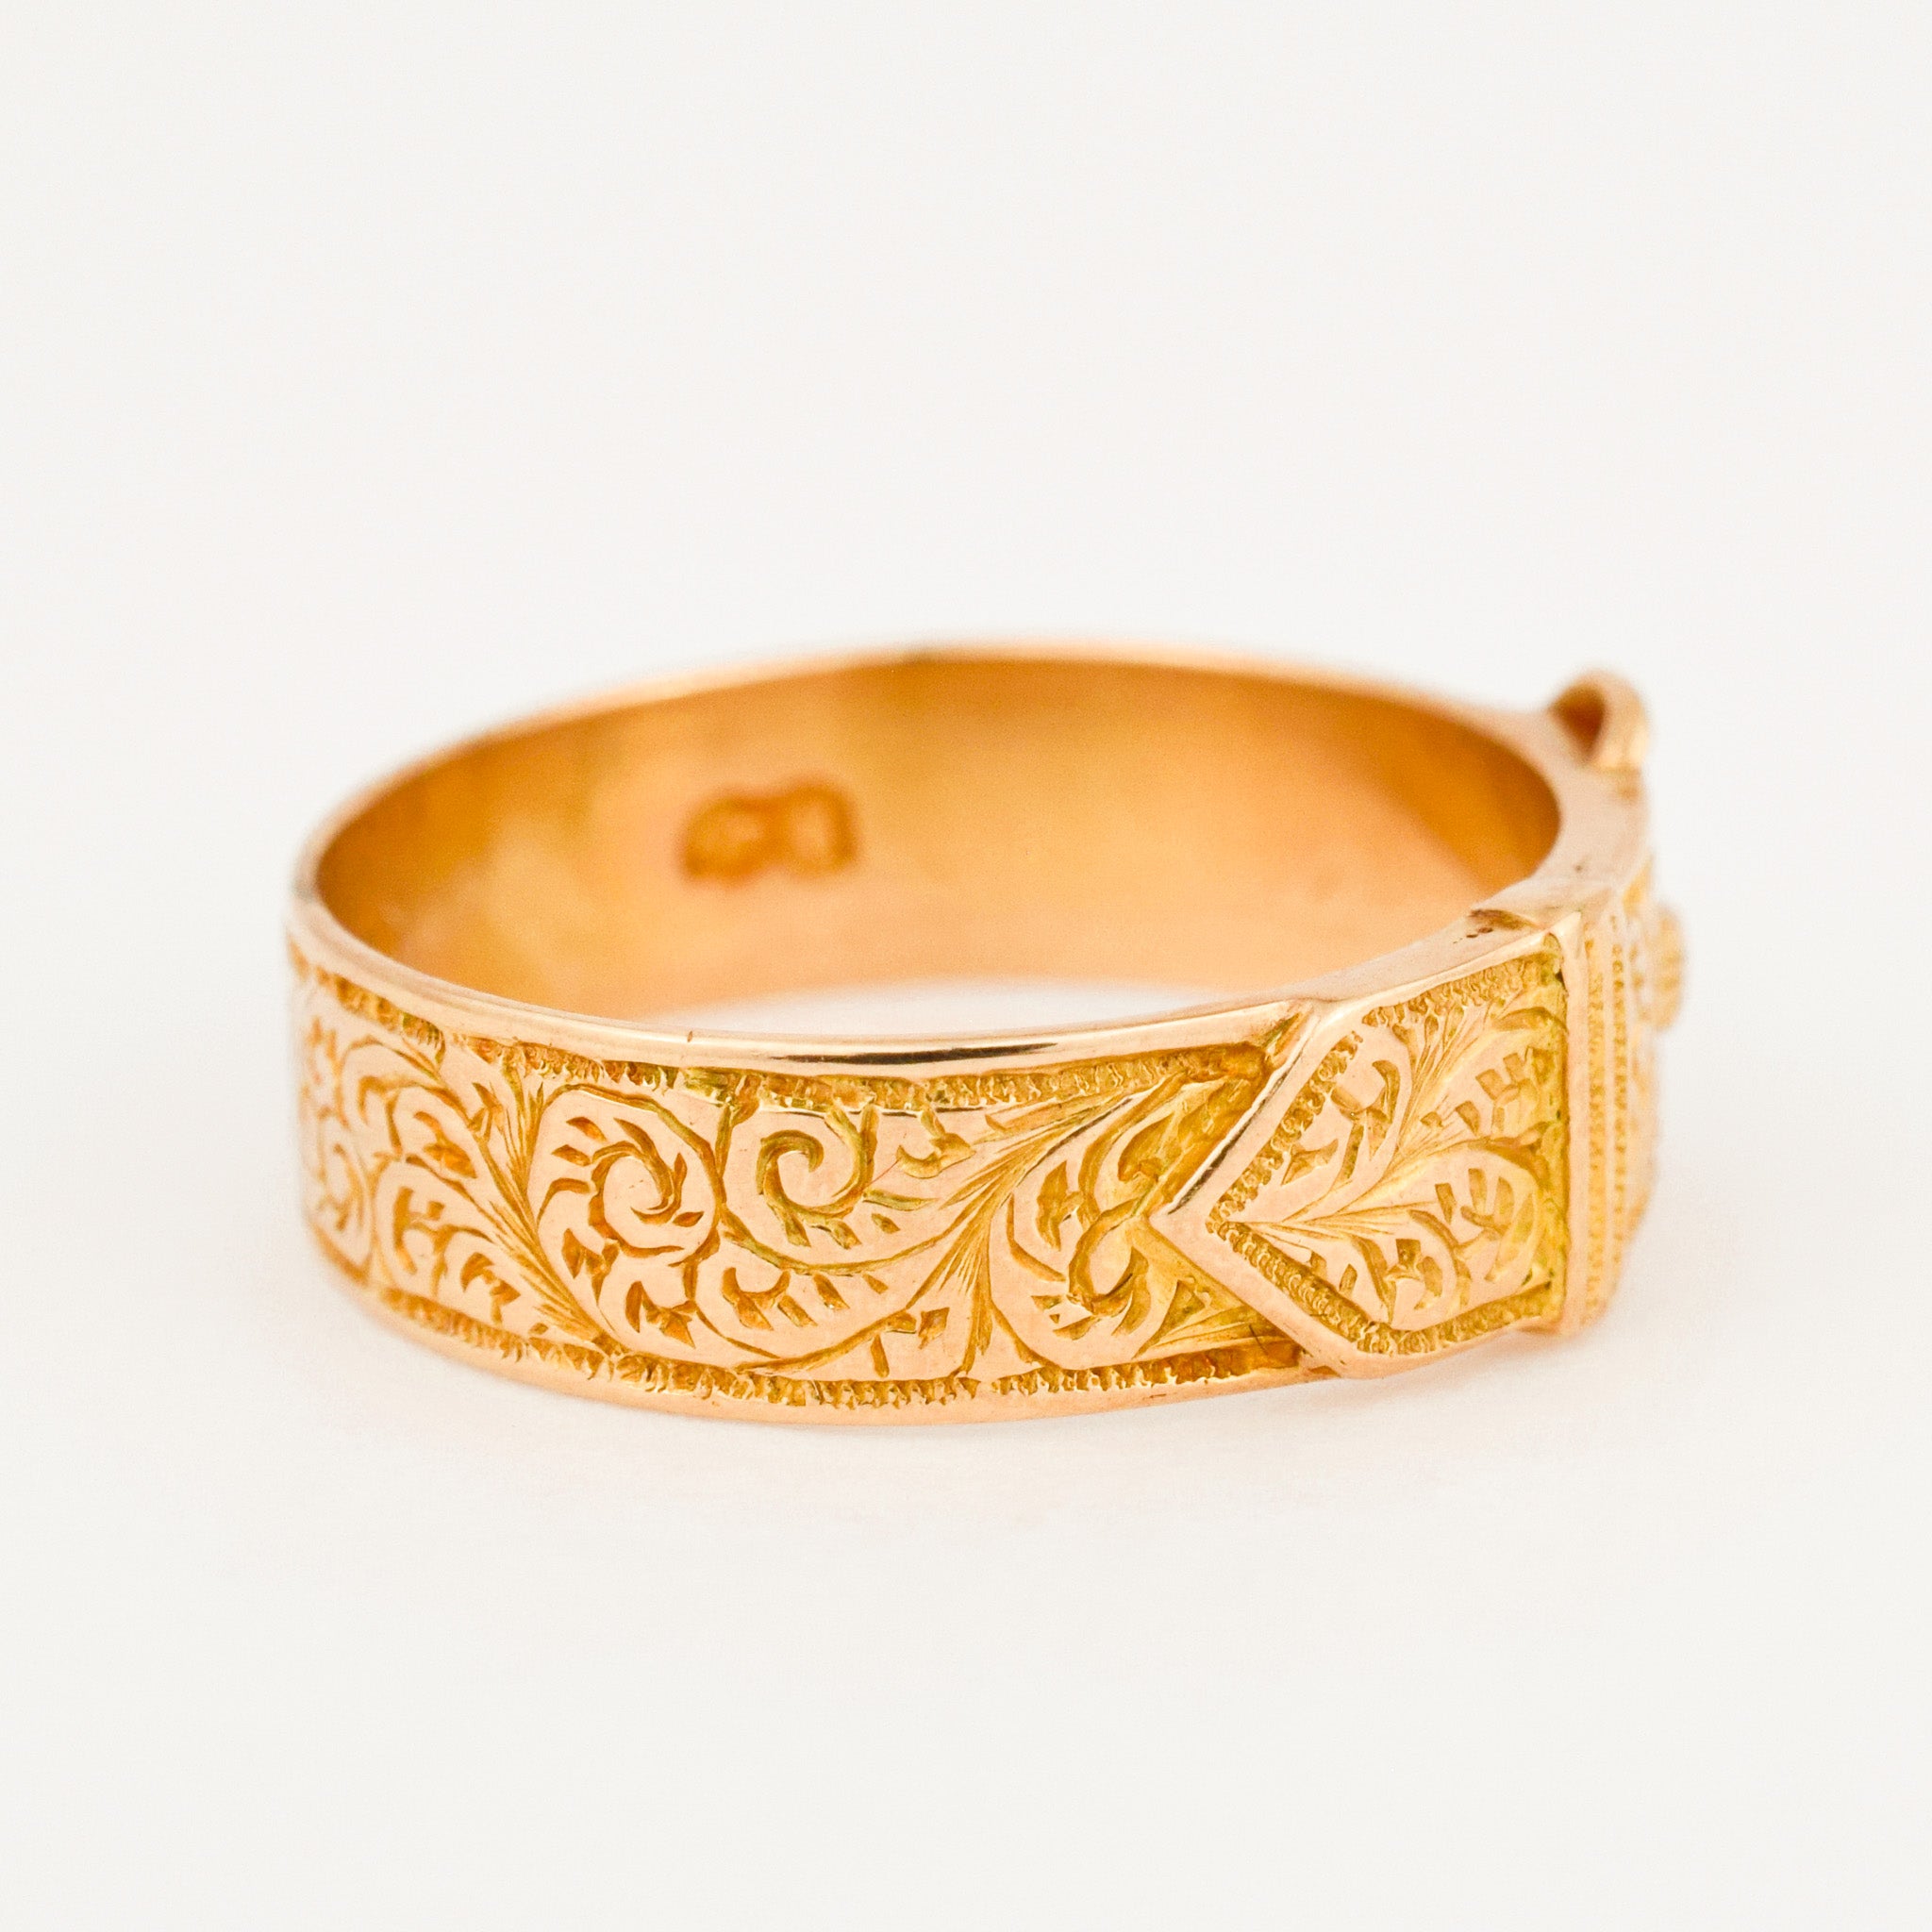 vintage exceptional 18k gold buckle ring 